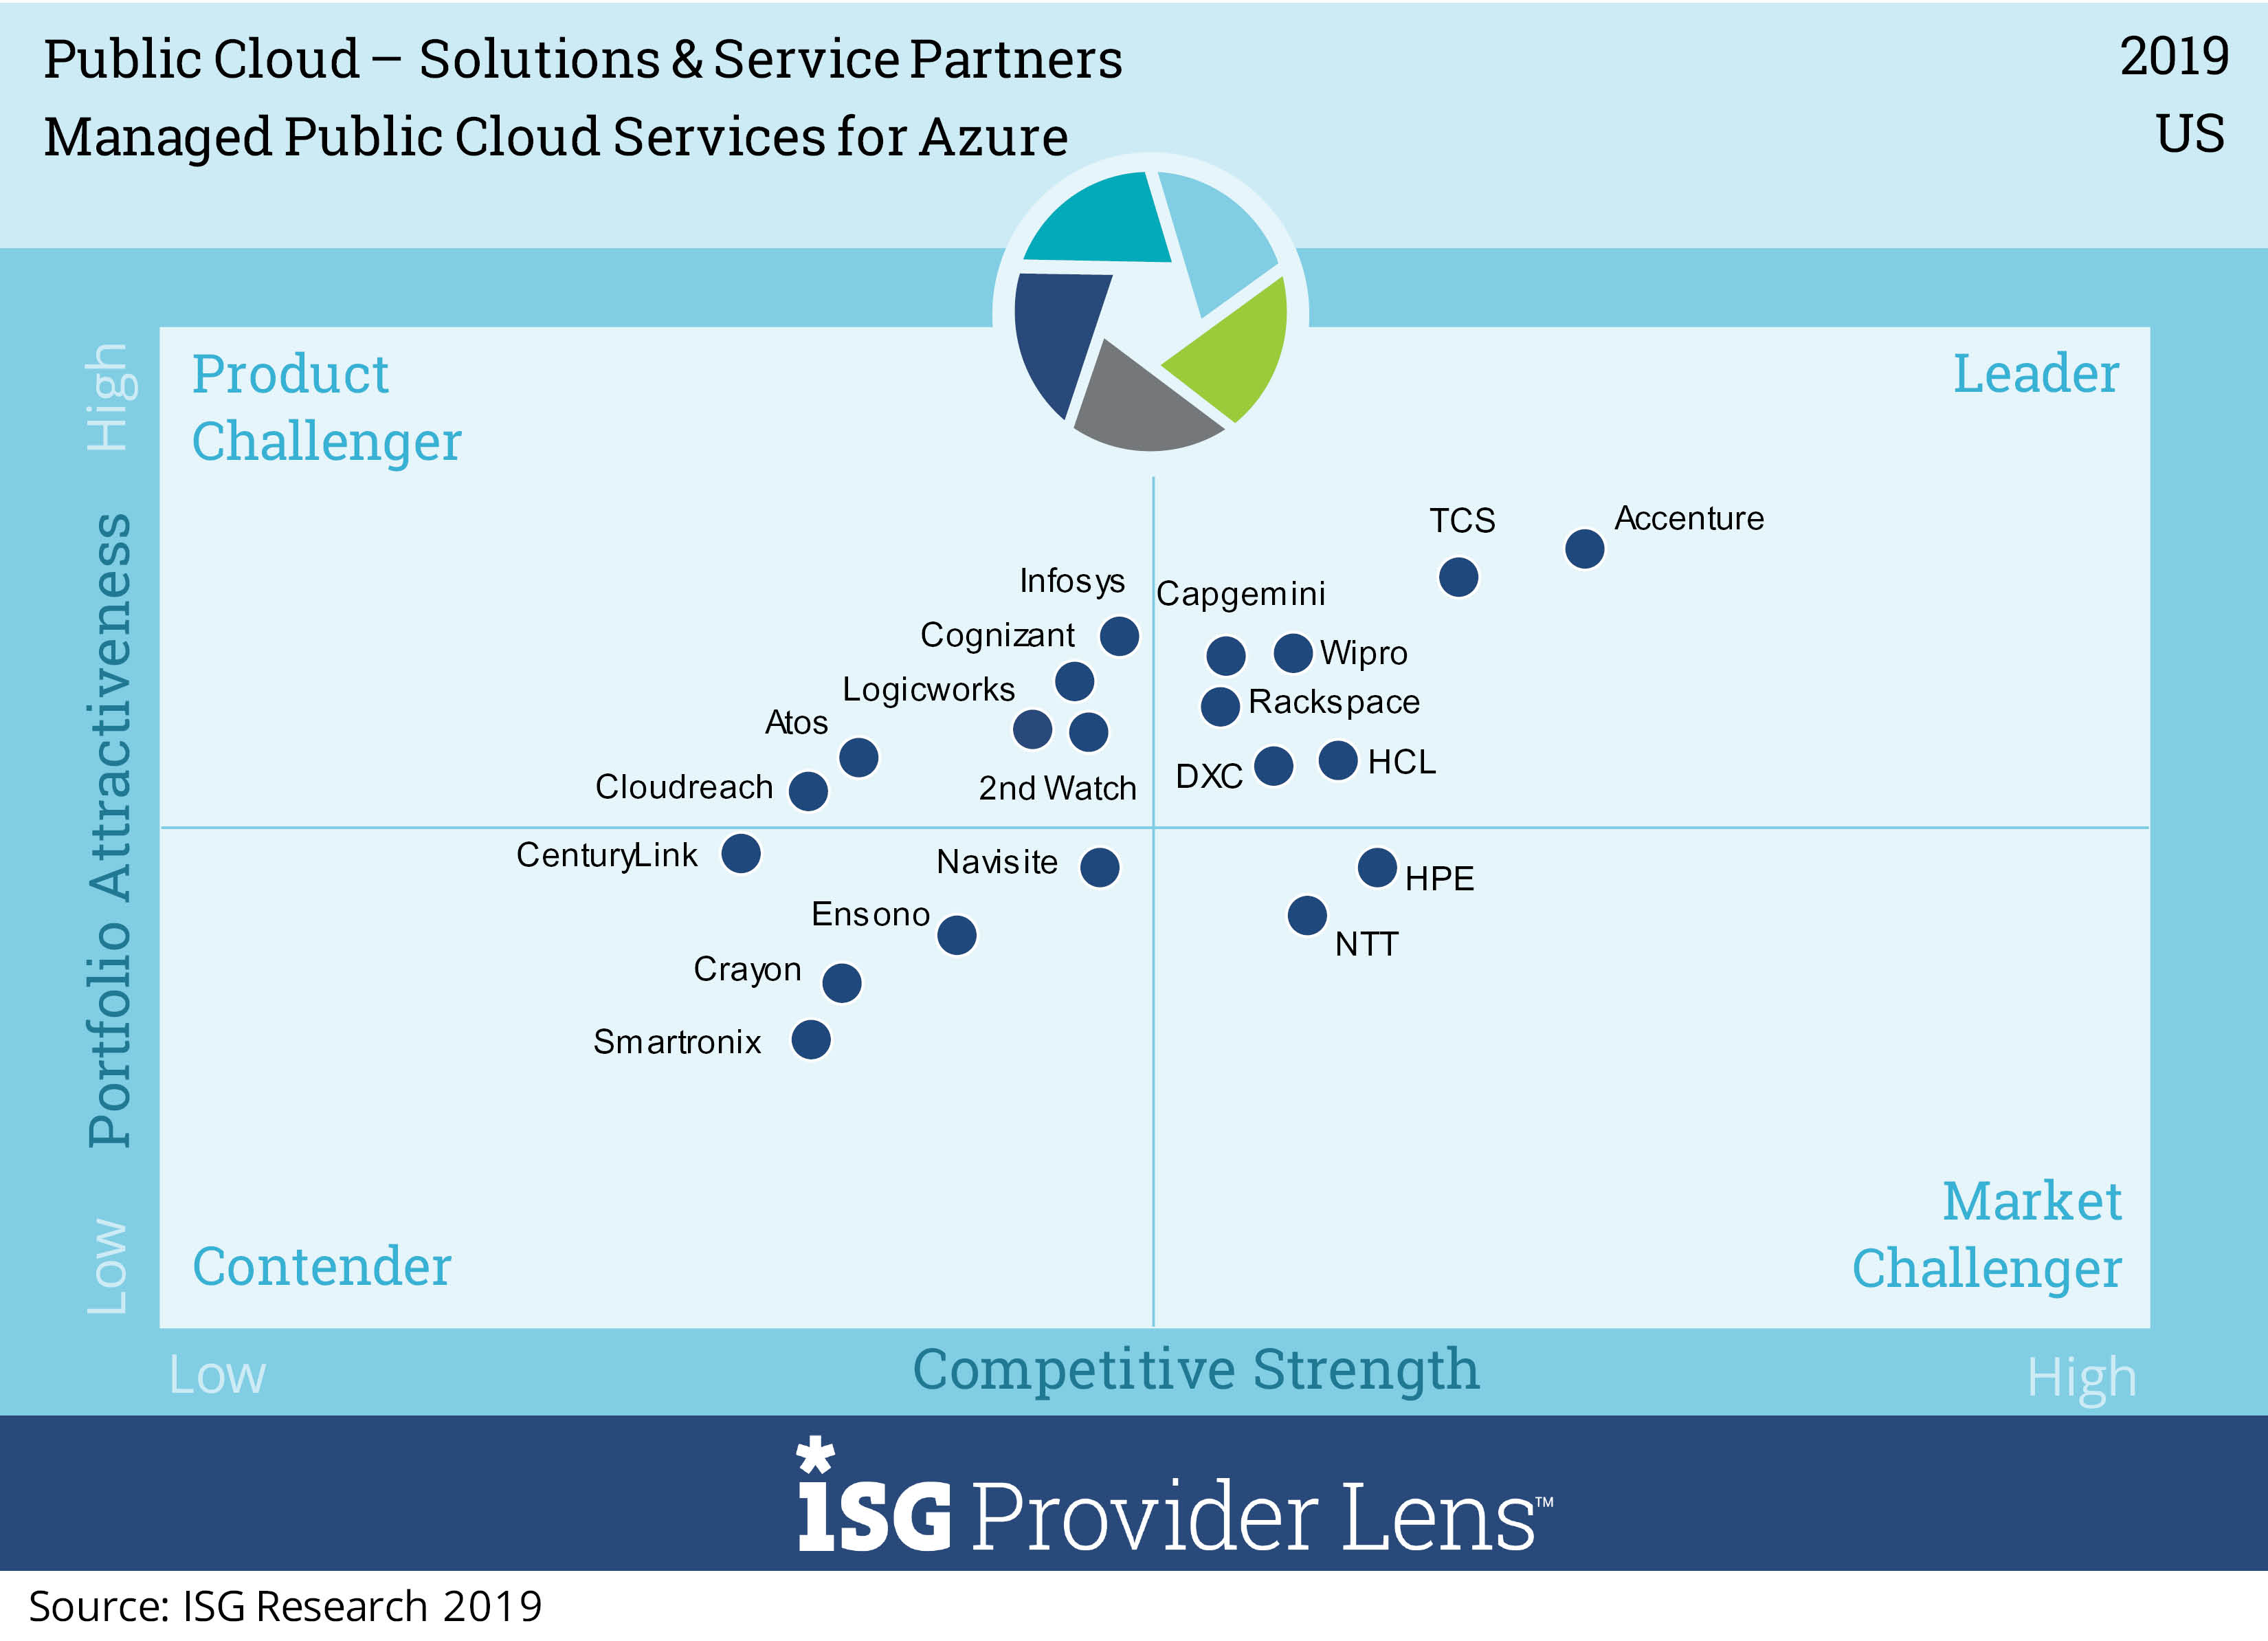 Wipro has been positioned as a US, UK, Nordics Leader in Public Cloud – Solutions & Service Partners - ISG Provider Lens™ study 2019 for Azure